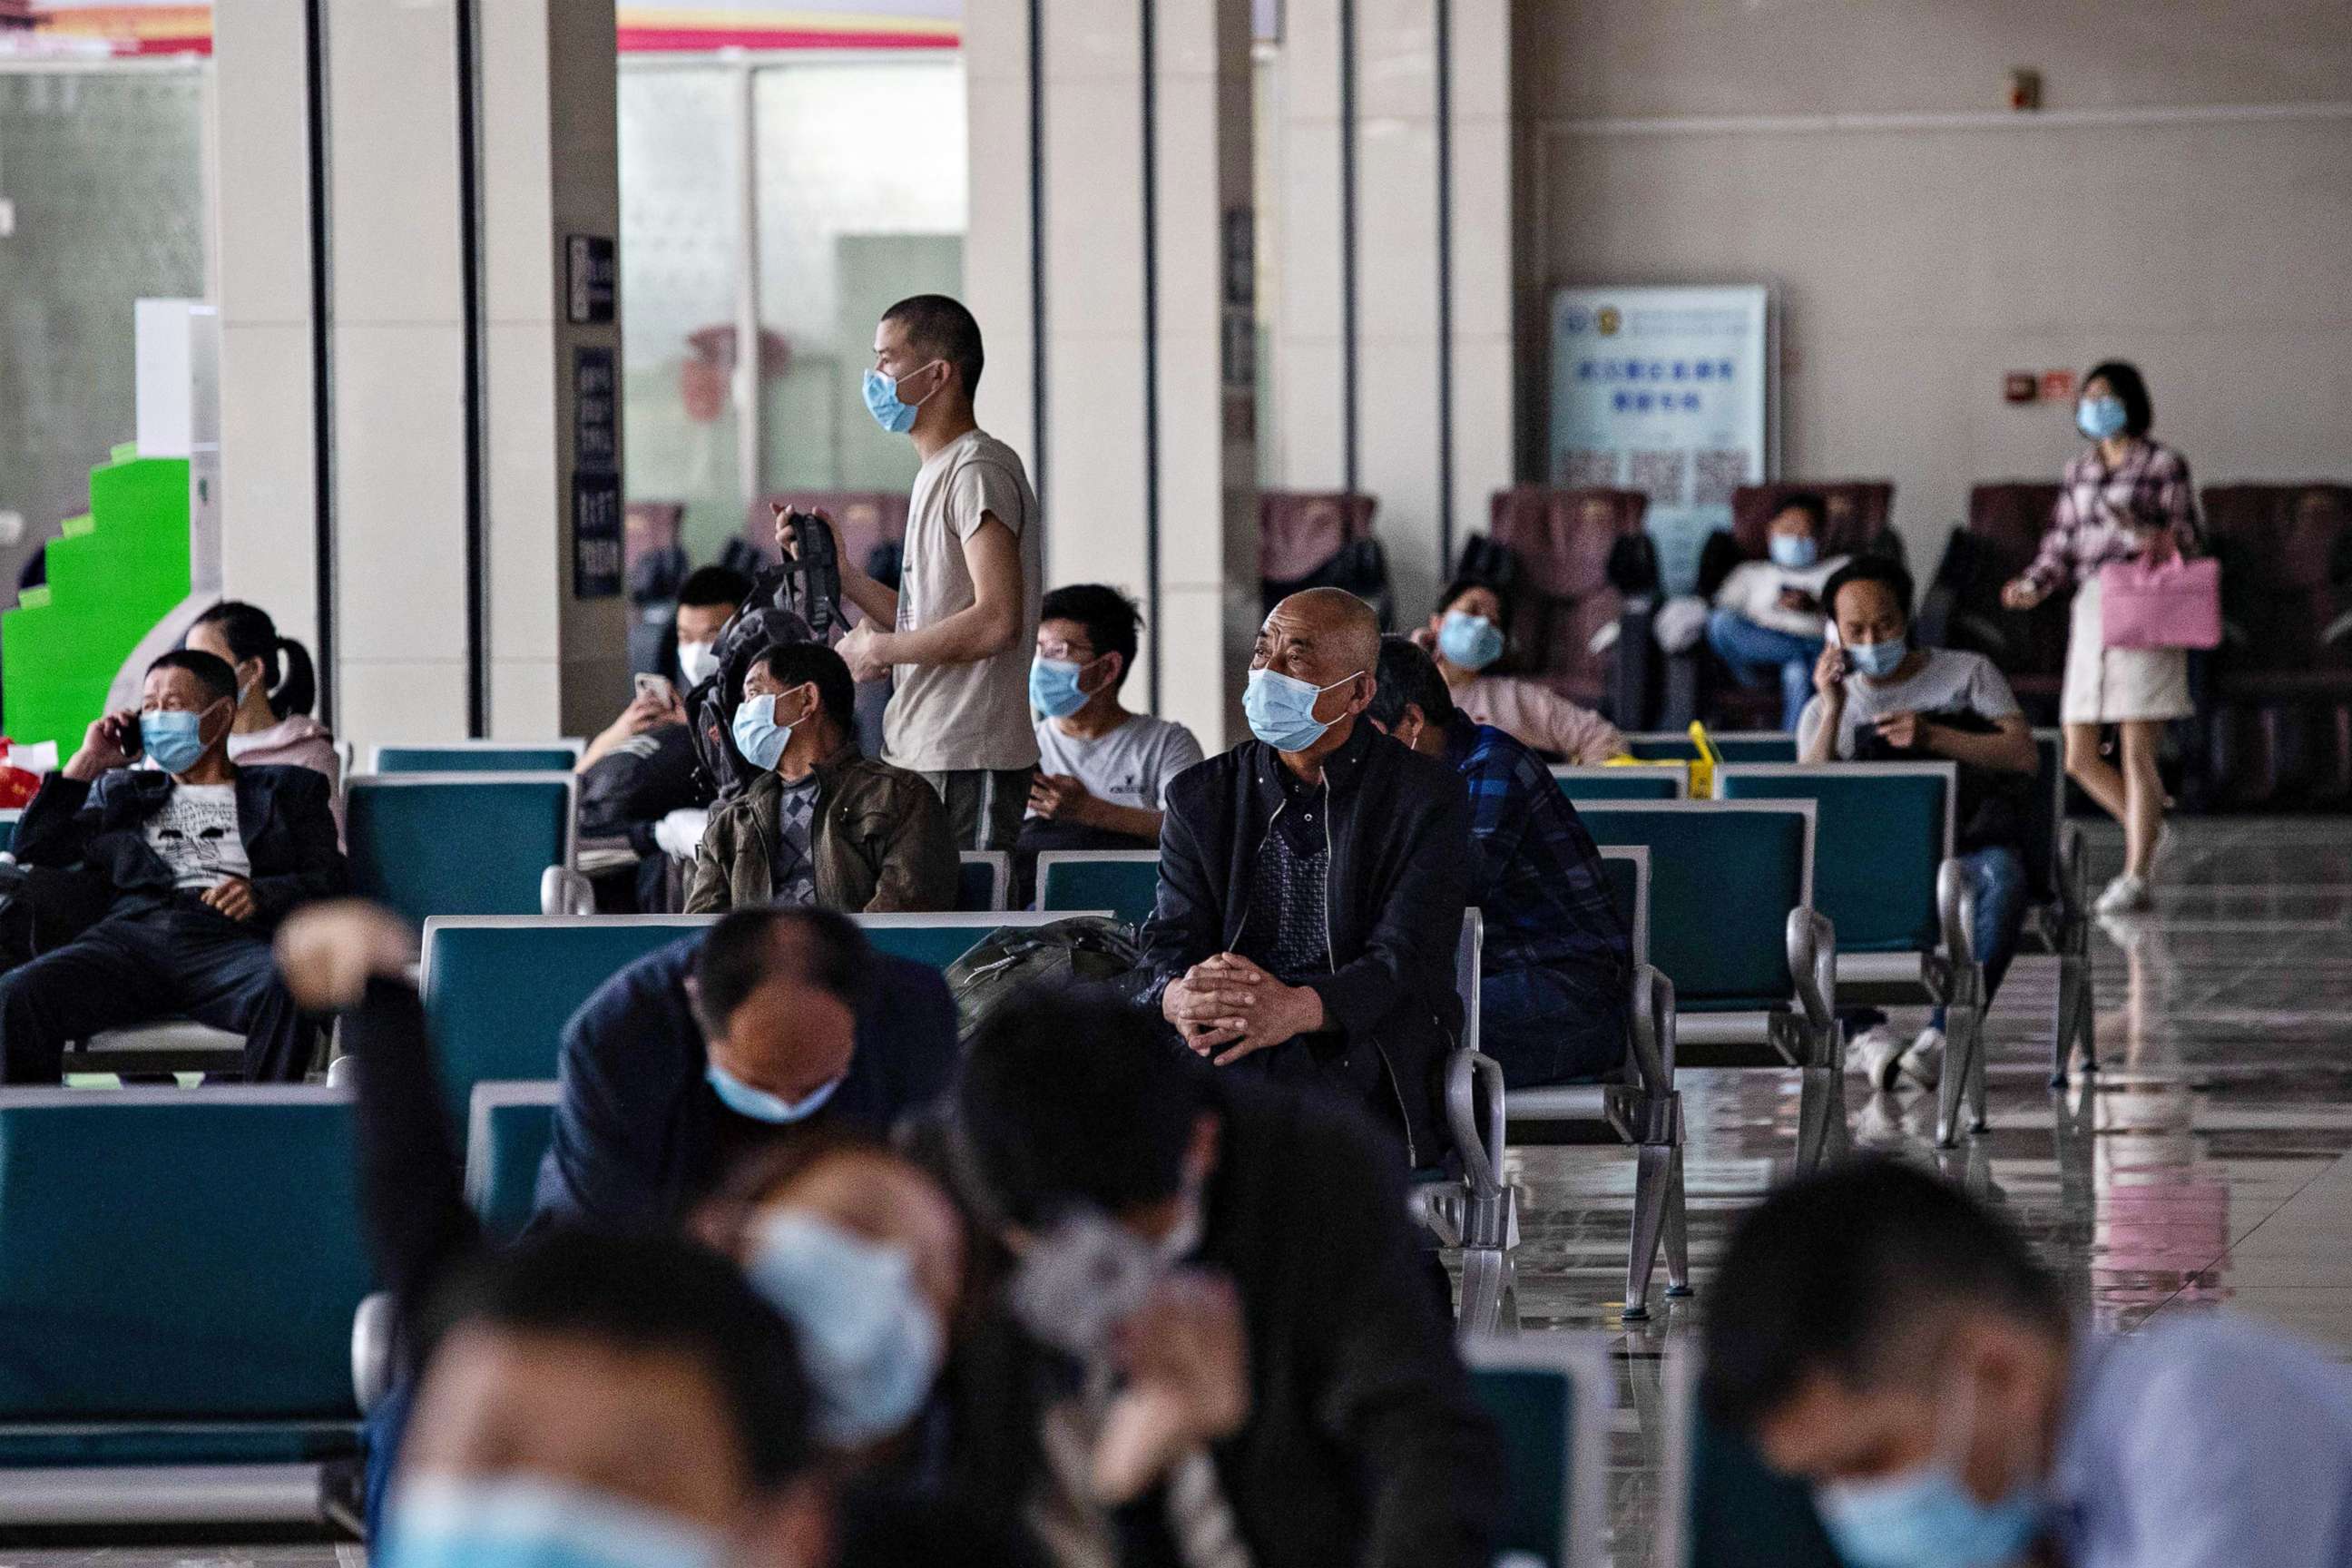 PHOTO: Passengers wait at a long-distance bus station in Wuhan in China's central Hubei province, on April 30, 2020, ahead of the Labor Day holiday which starts on May 1.